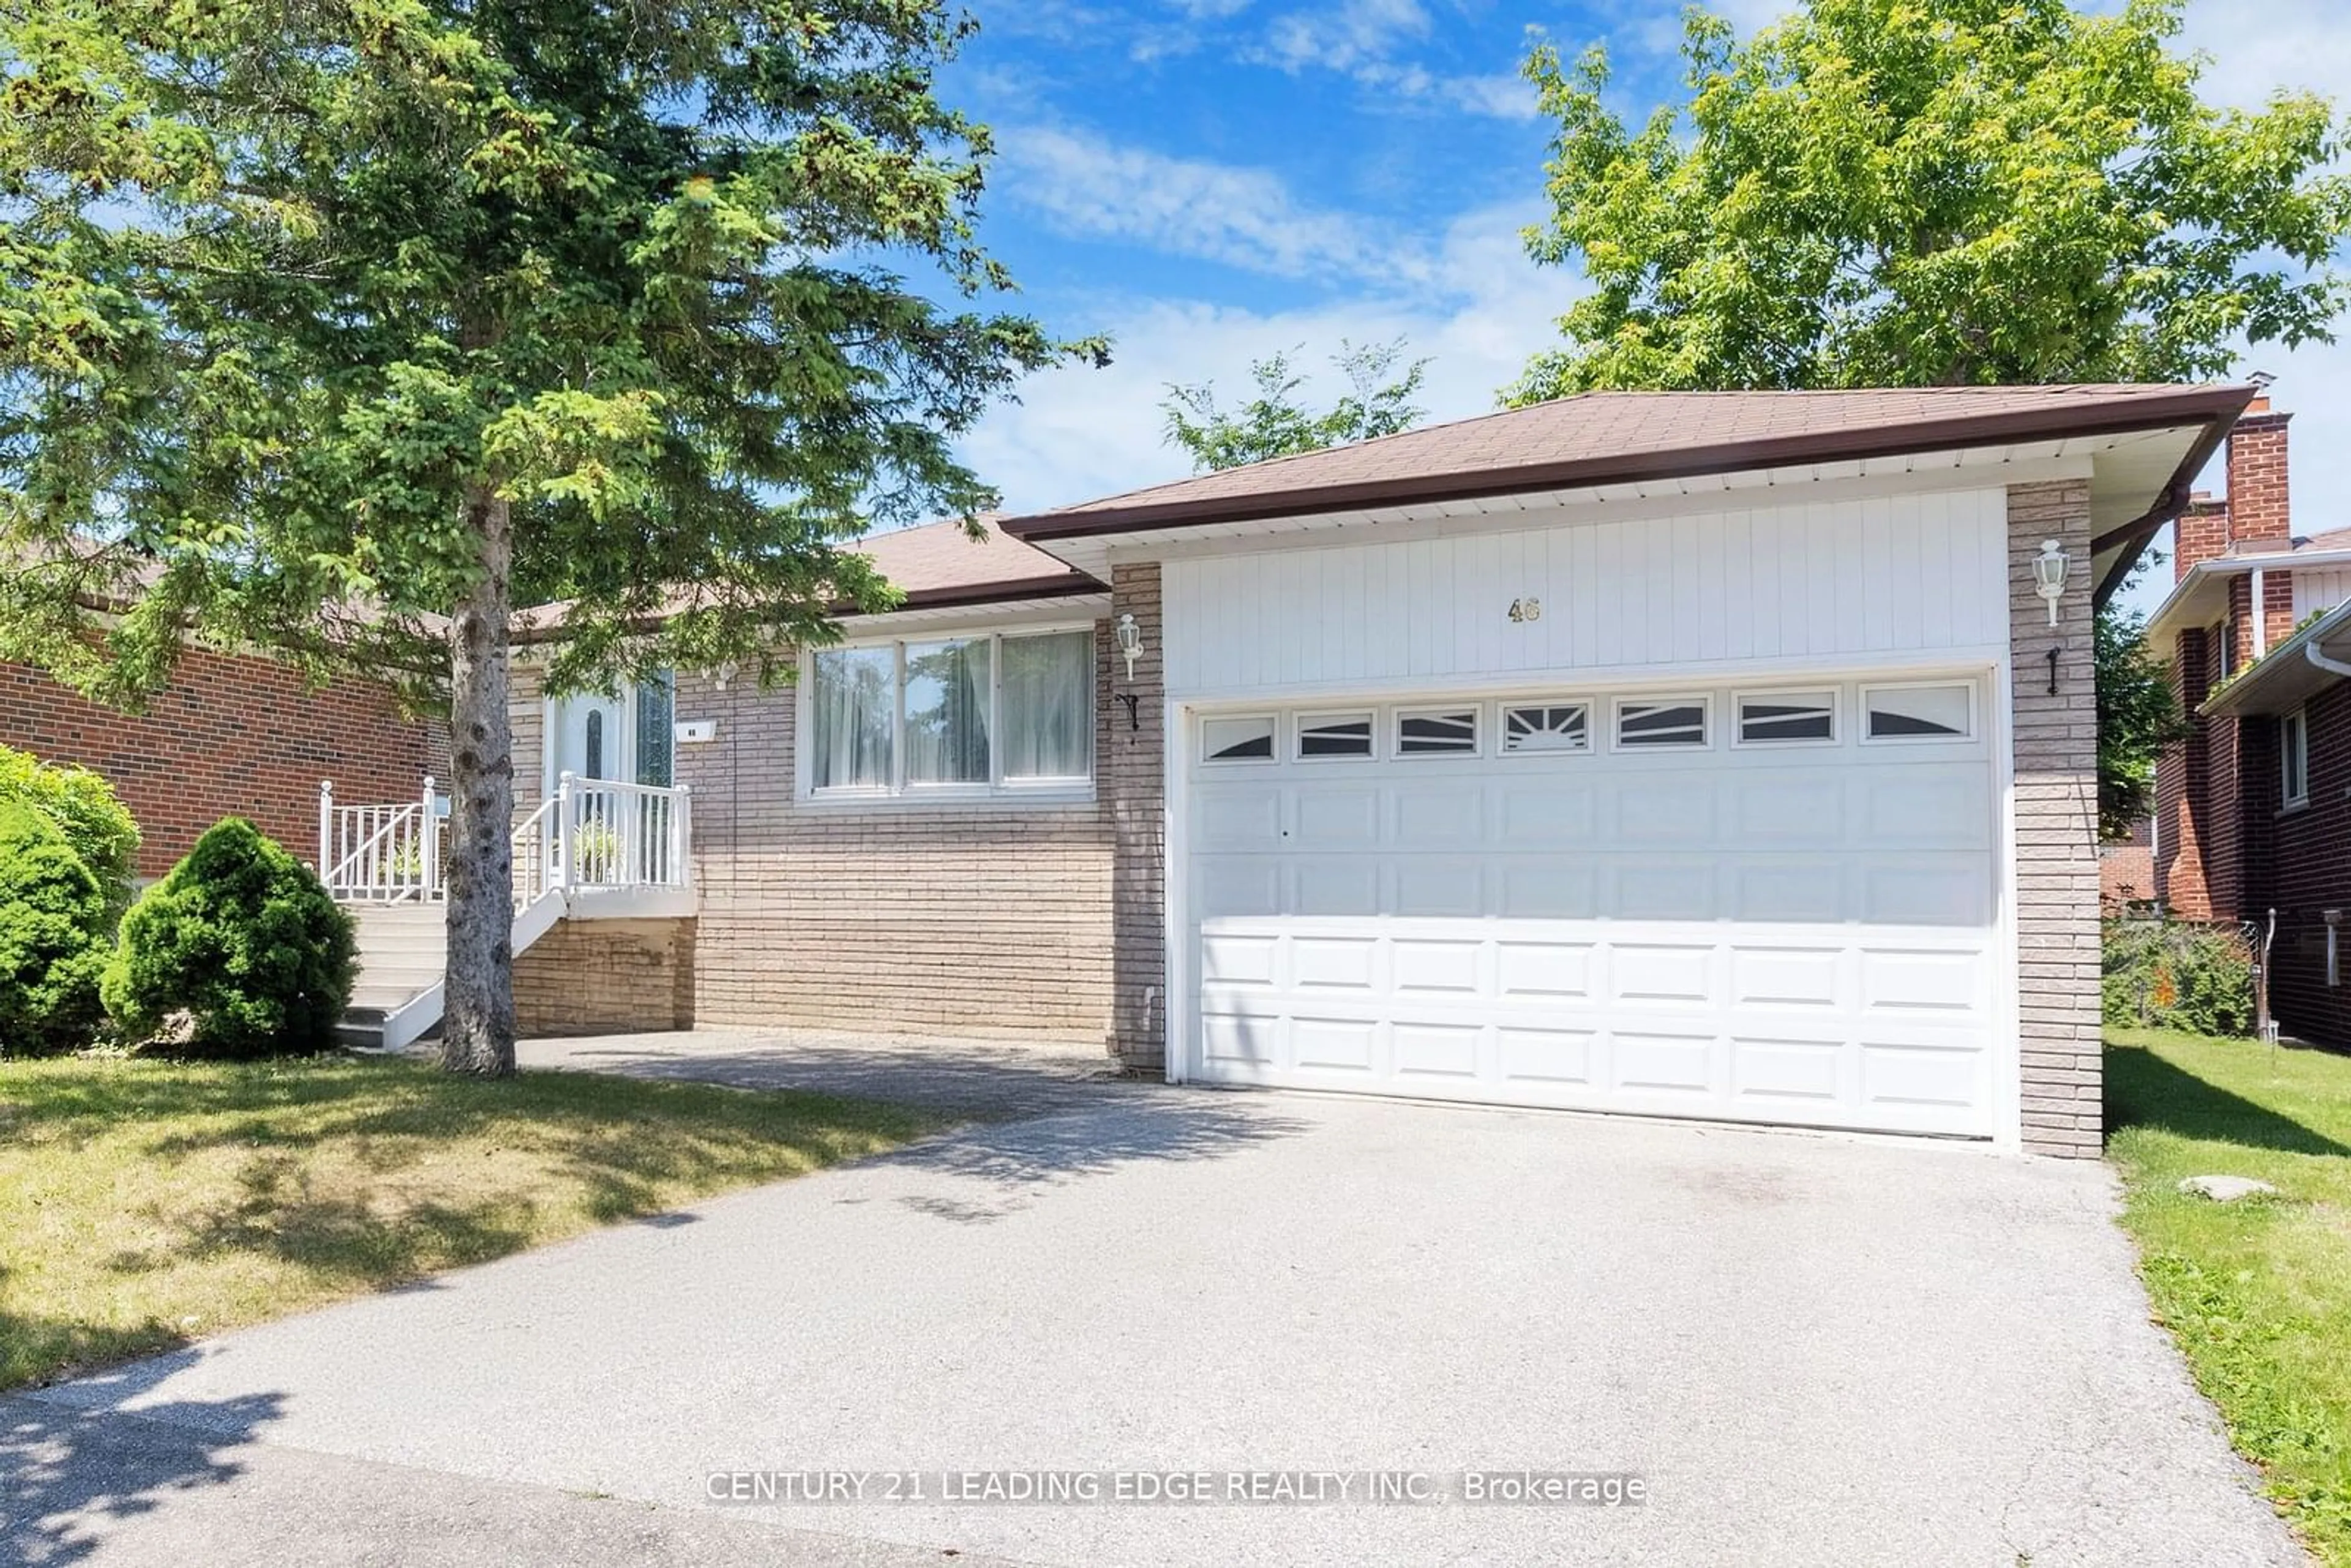 Frontside or backside of a home for 46 Budworth Dr, Toronto Ontario M1E 3H9